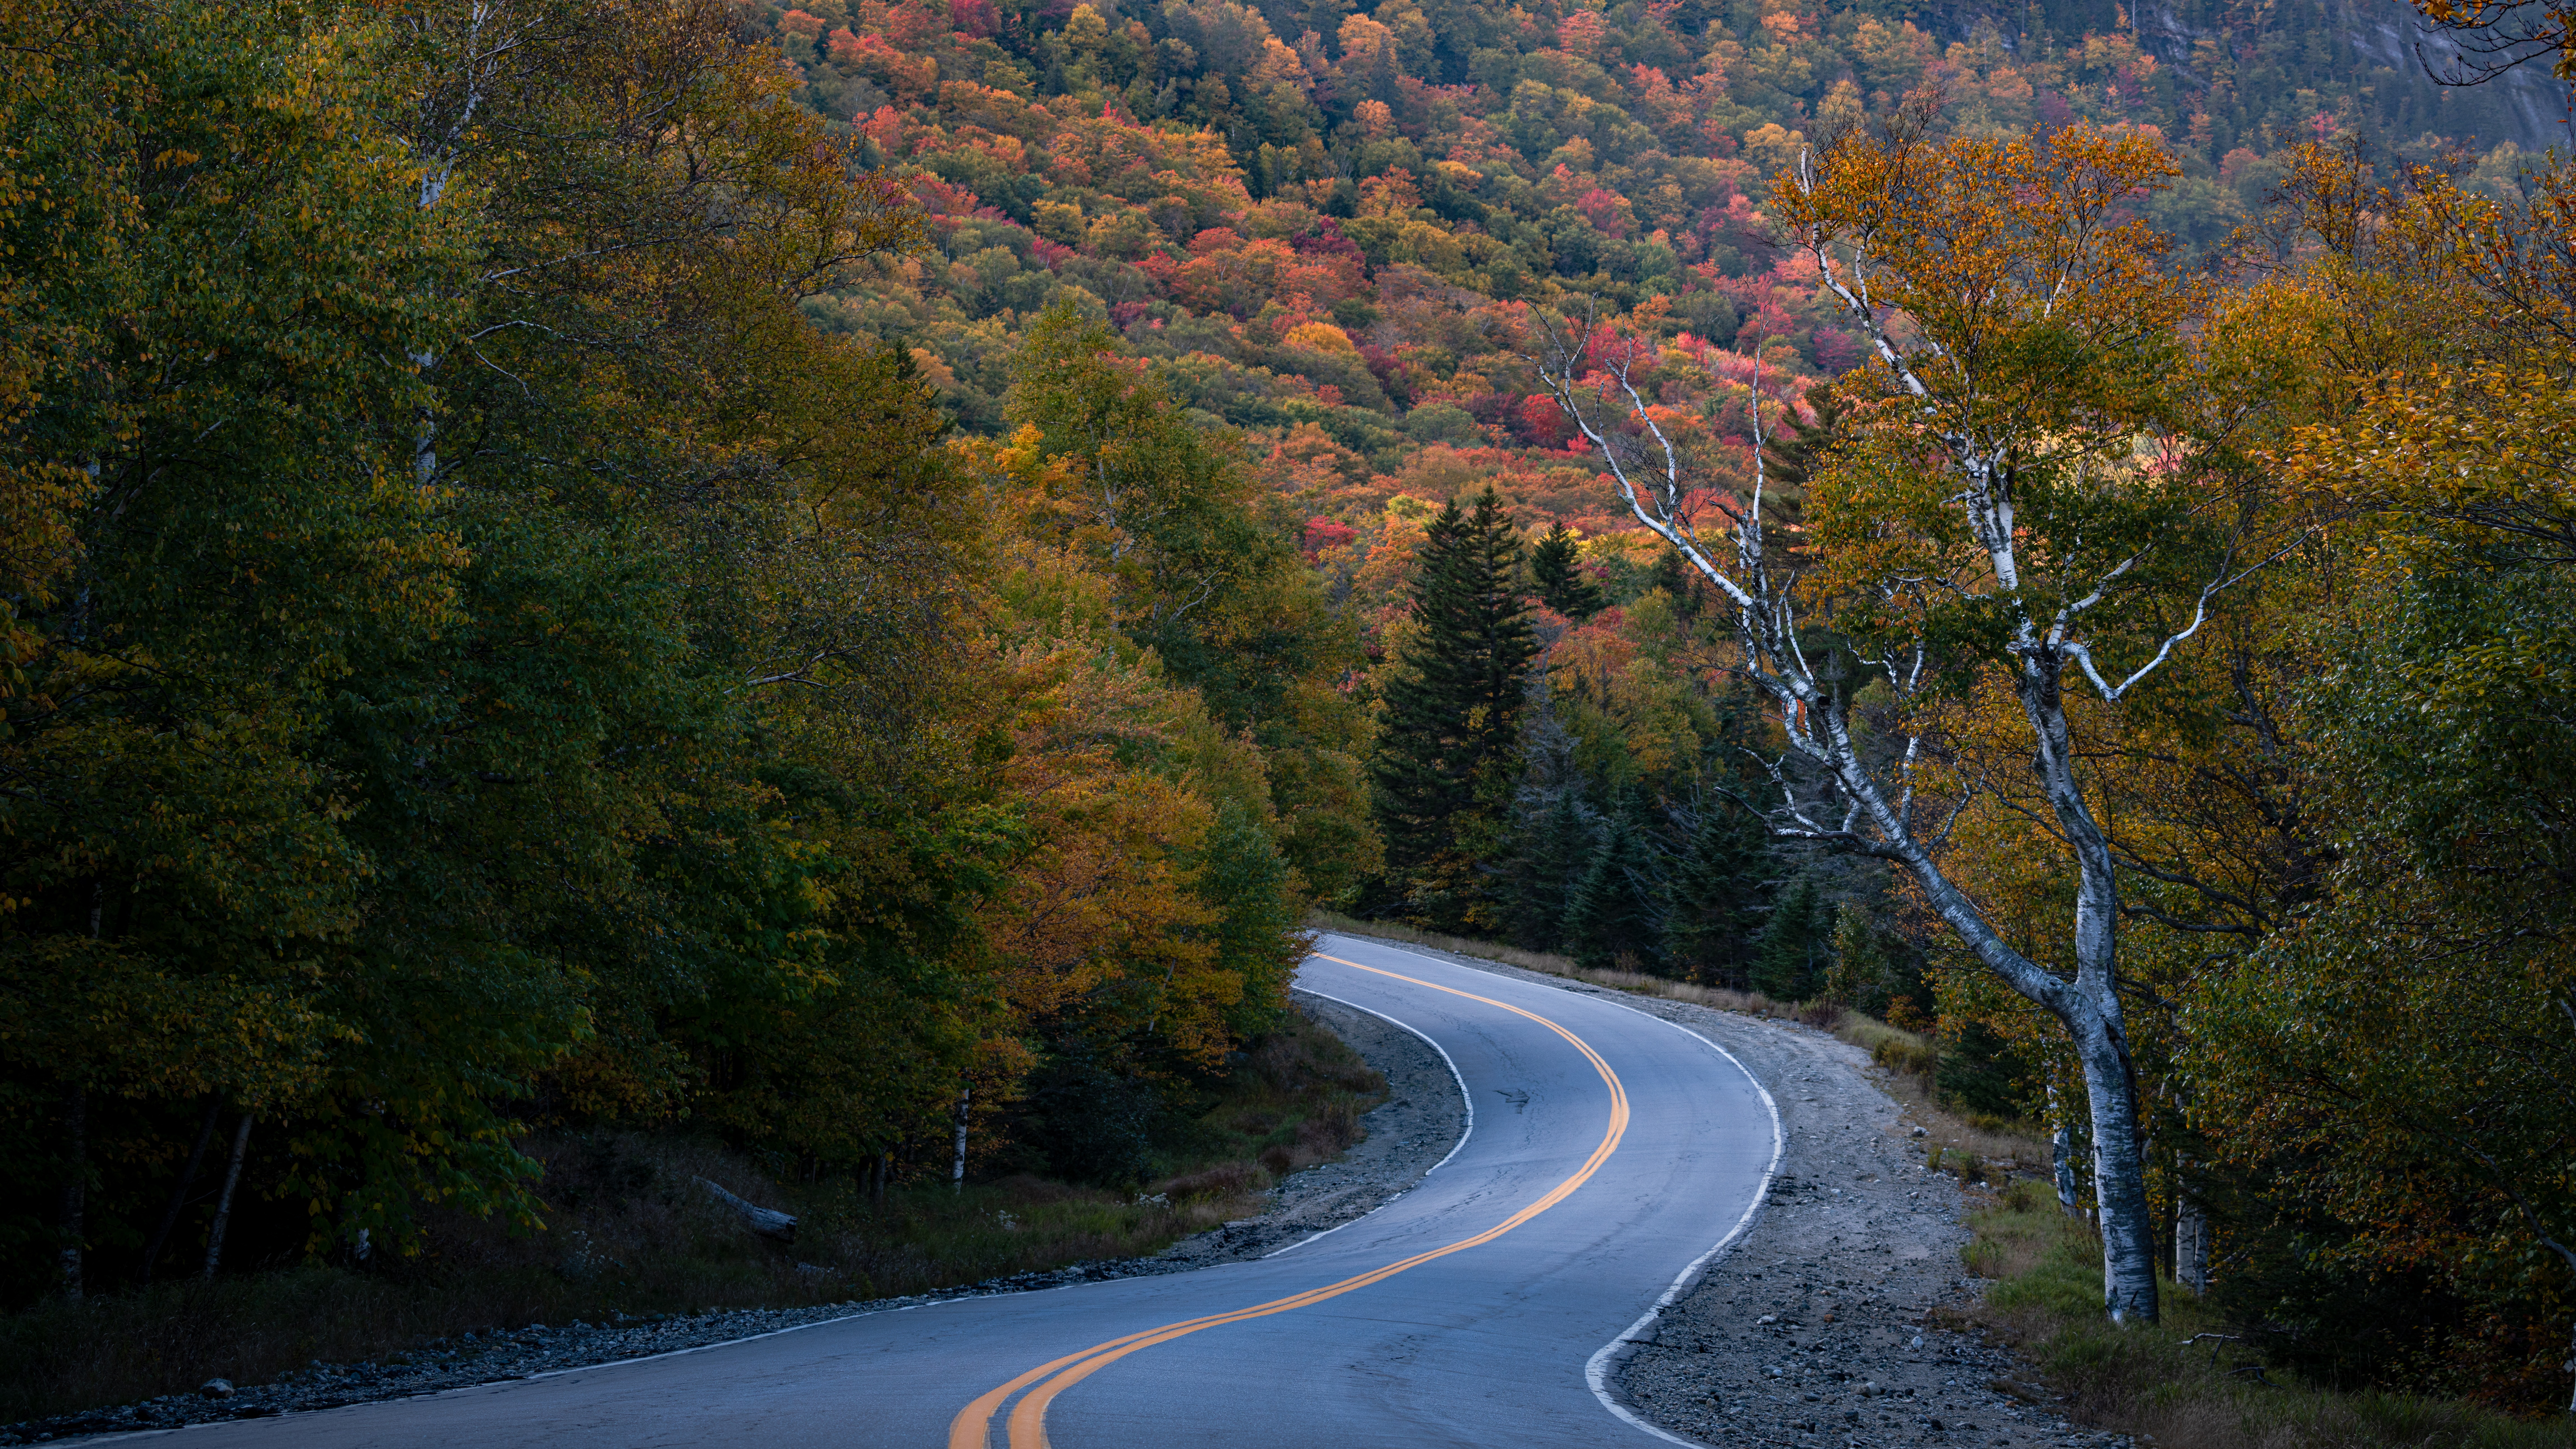 Montpelier, Vermont has many nature attractions for visitors to enjoy. 
pictured: A road in Vermont with pretty red, green, and yellow leaved trees in the back